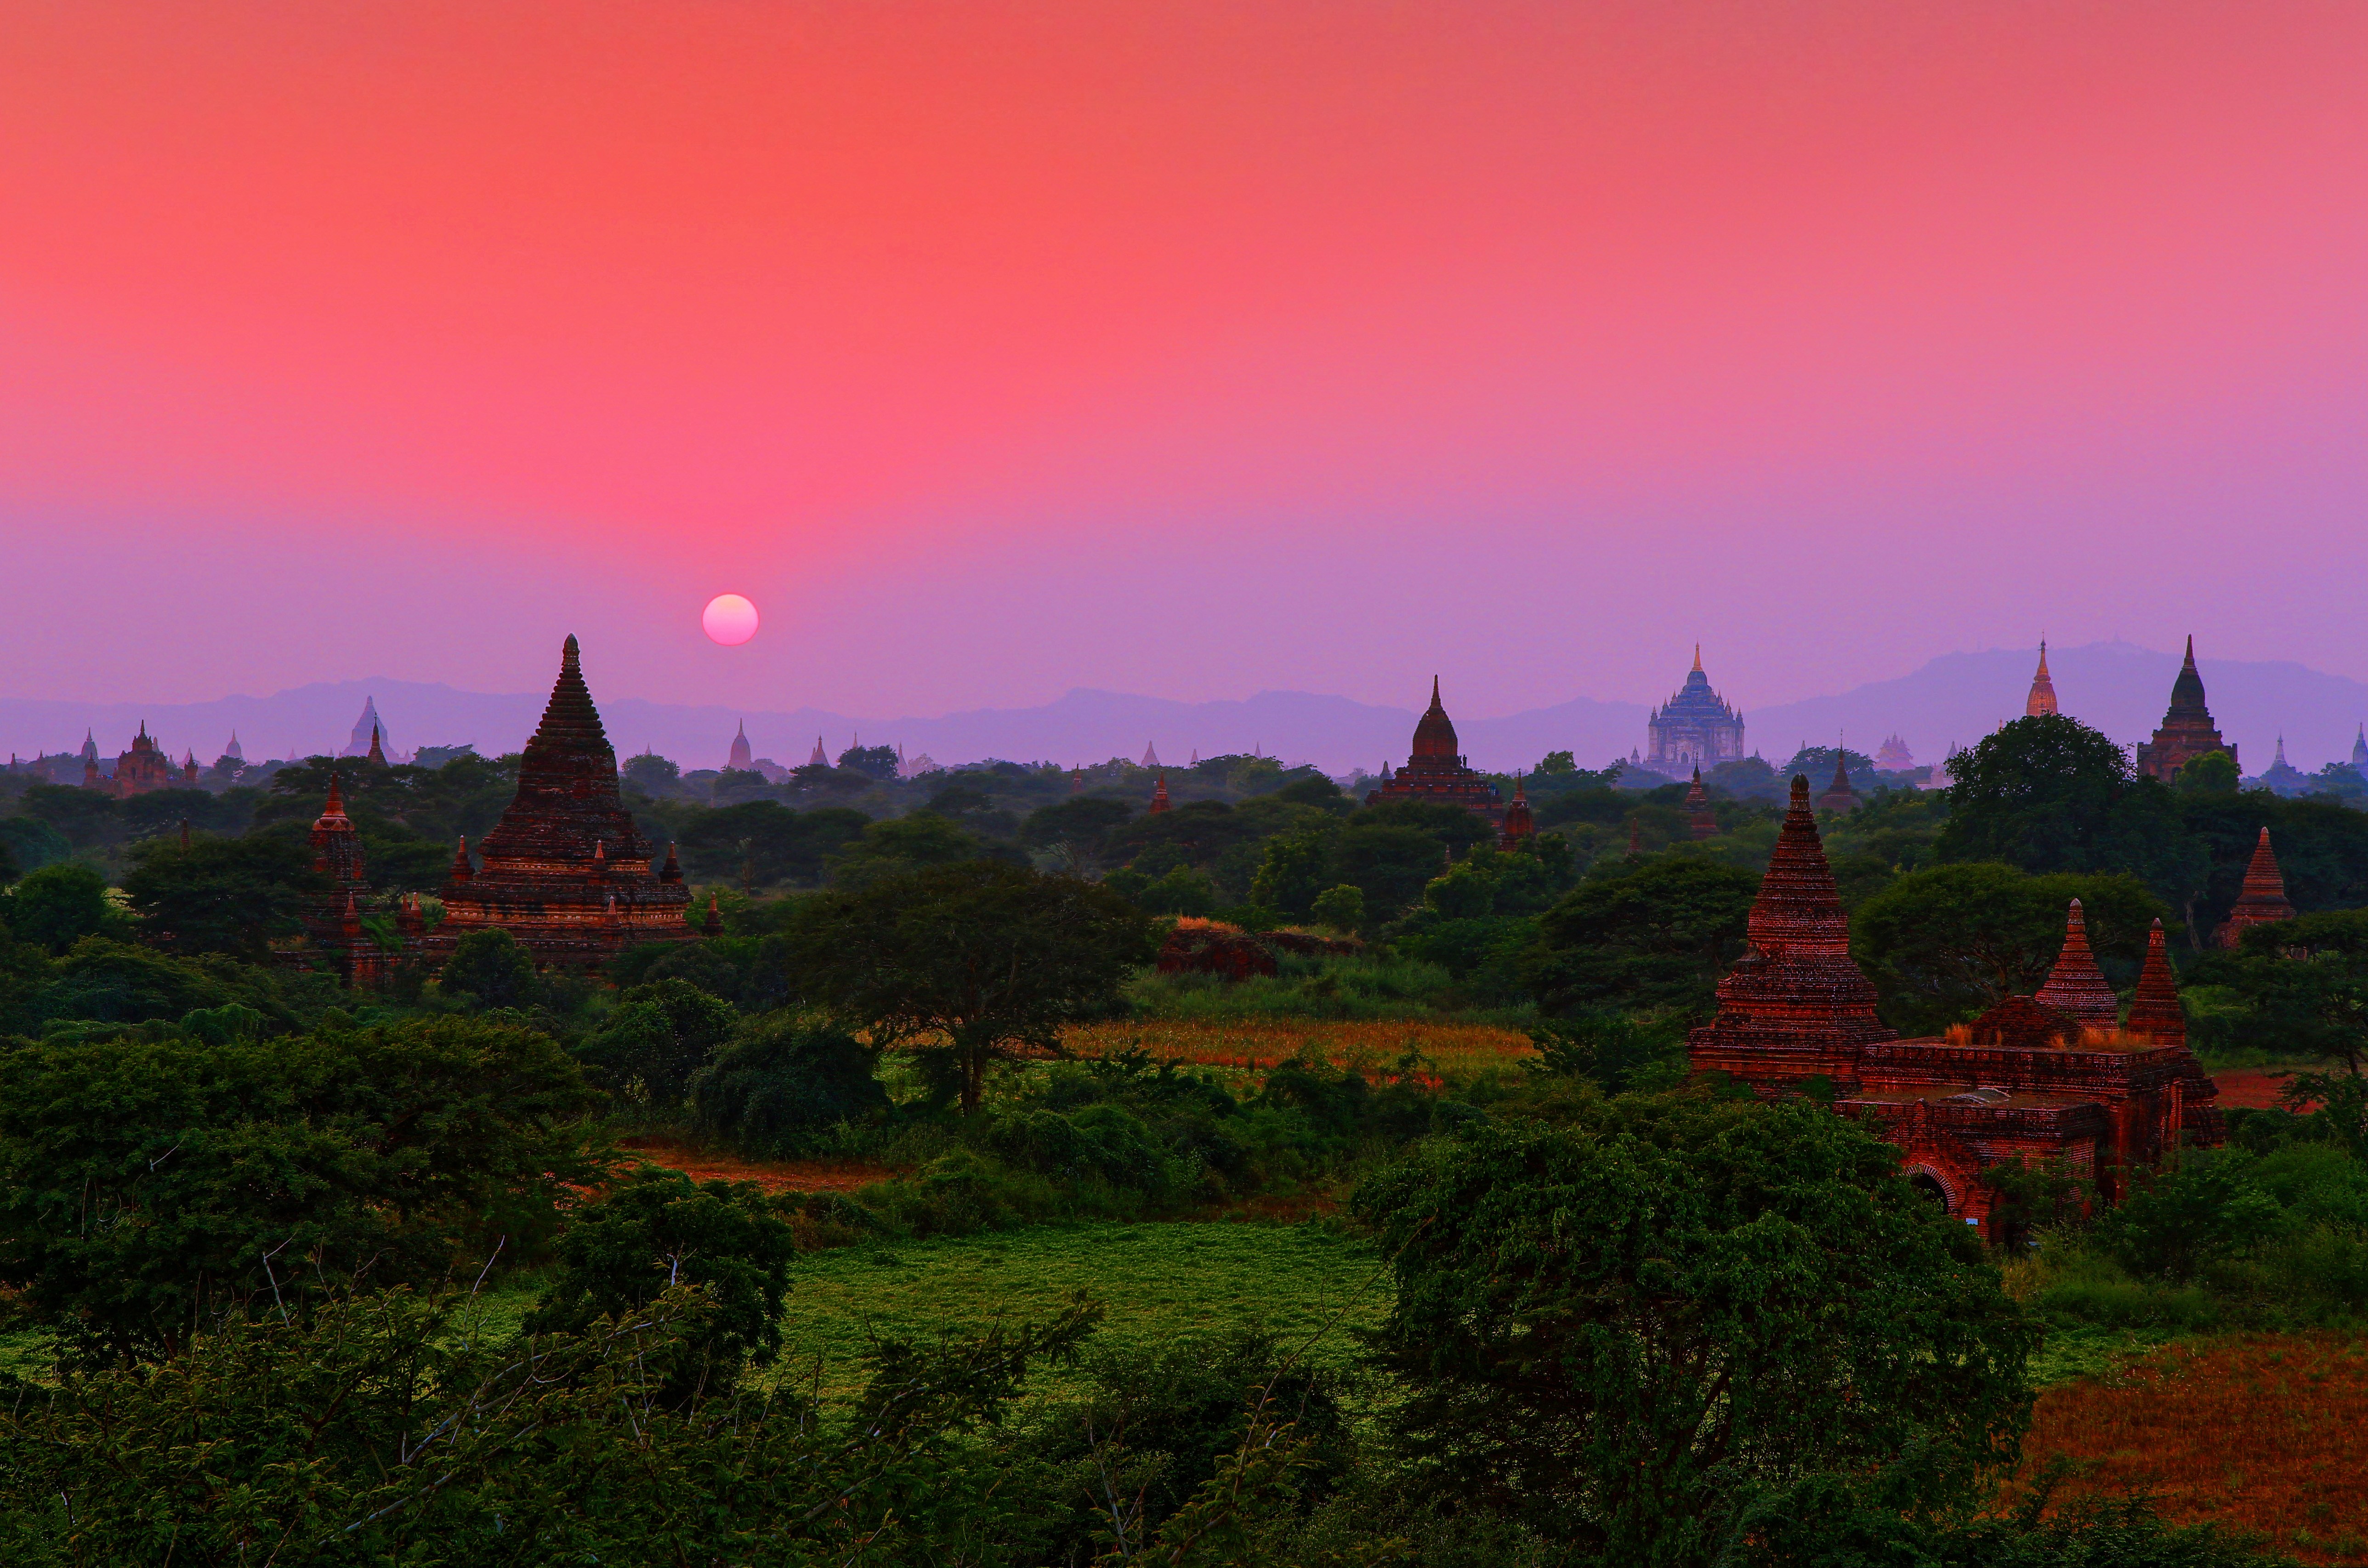 Travel tips for your trip in Bagan, Myanmar